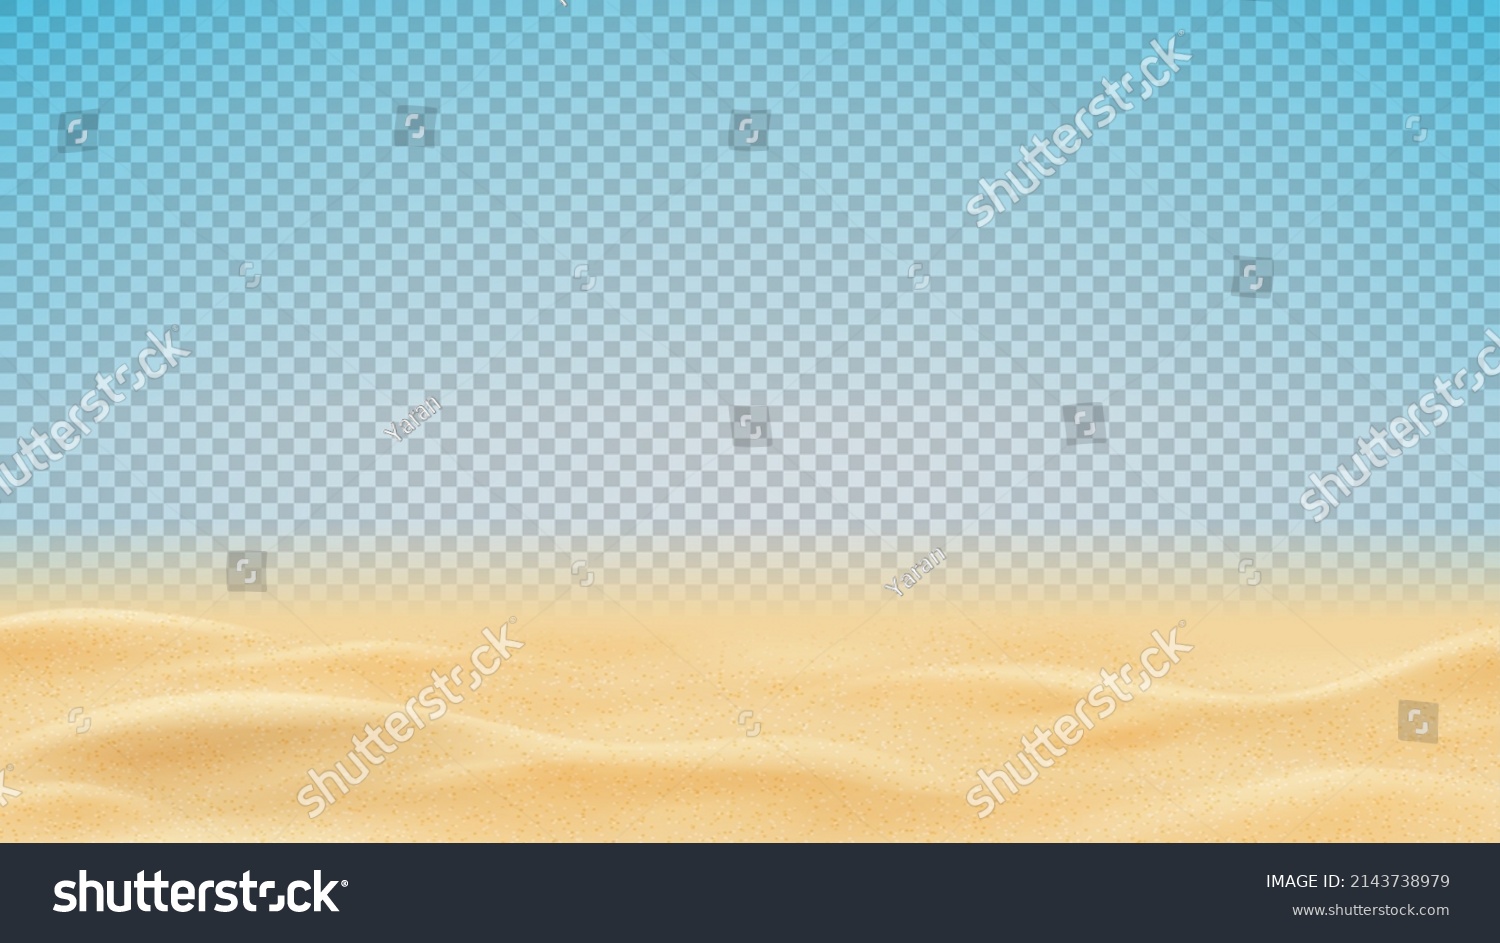 SVG of Realistic texture of beach or desert sand. Vector illustration with ocean, river, desert or sea sand isolated on checkered background. 3d vector illustration. svg